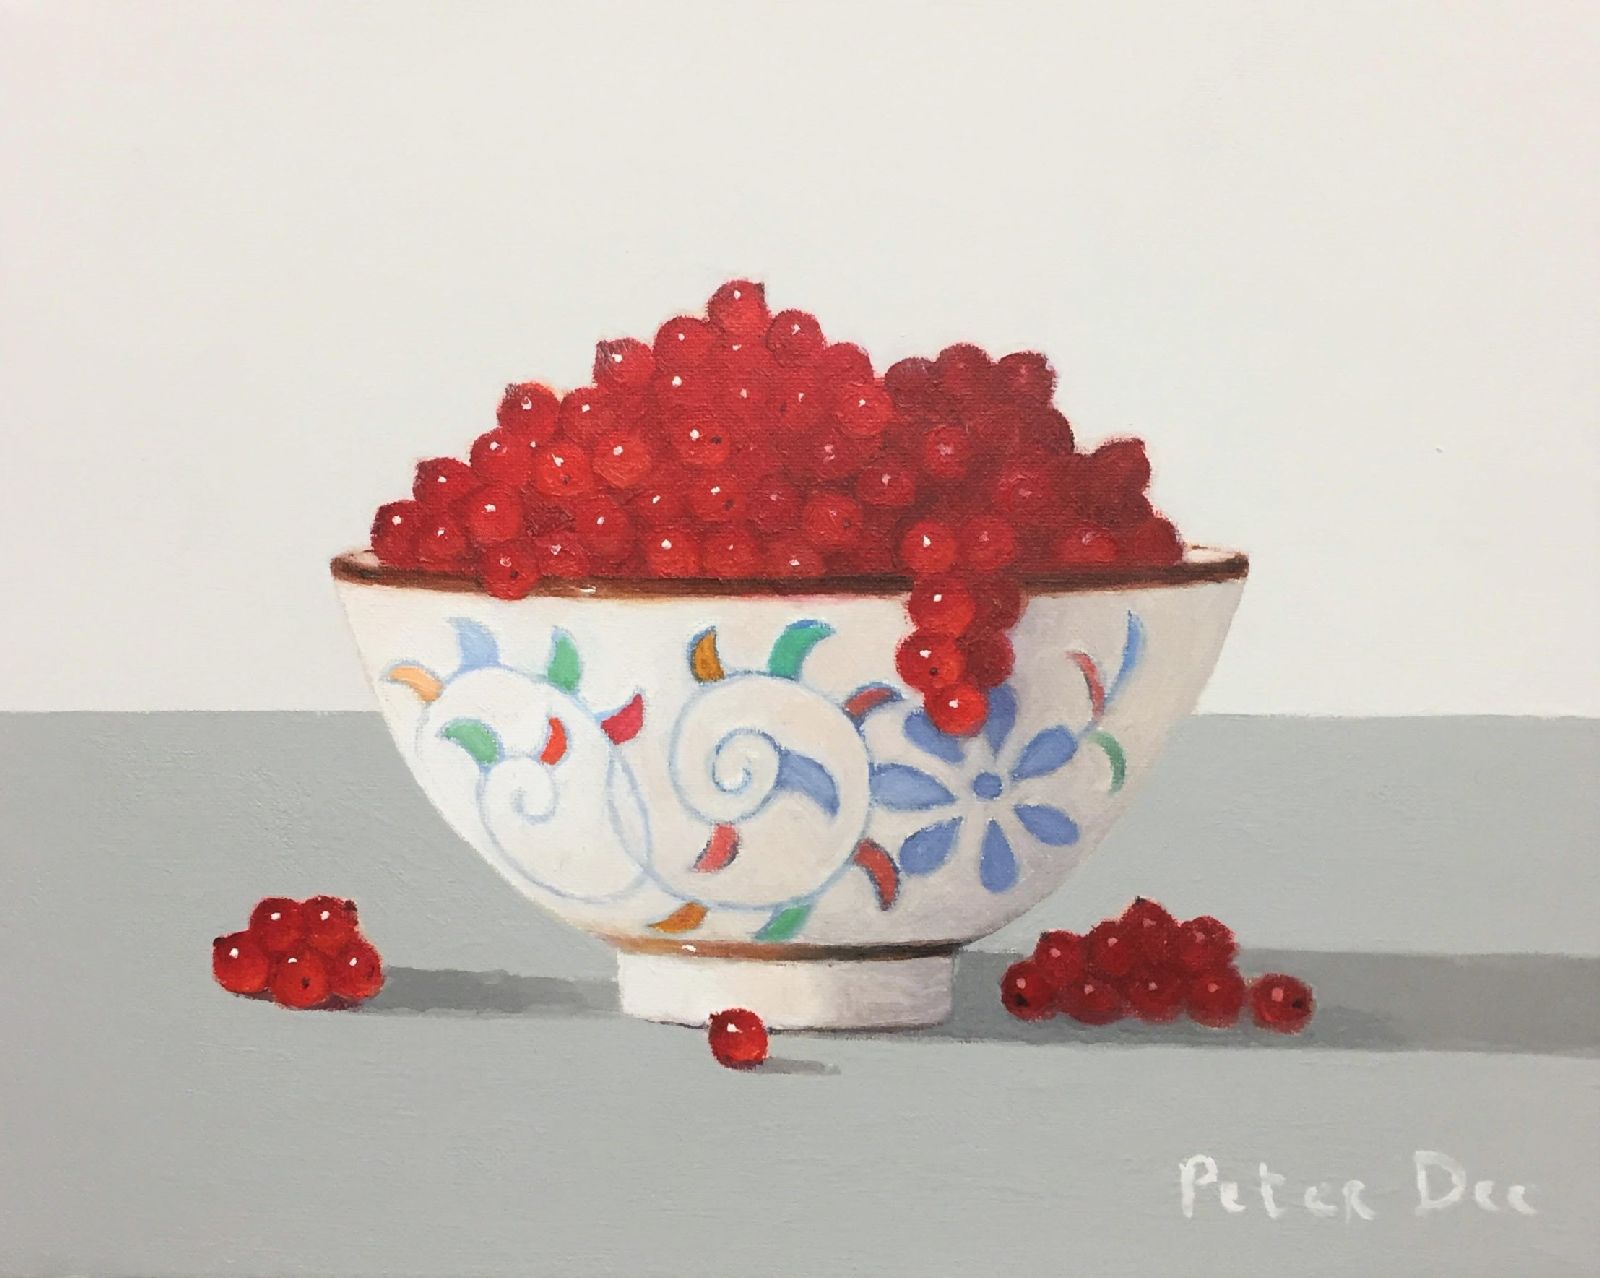 Bowl of Redcurrants by Peter Dee